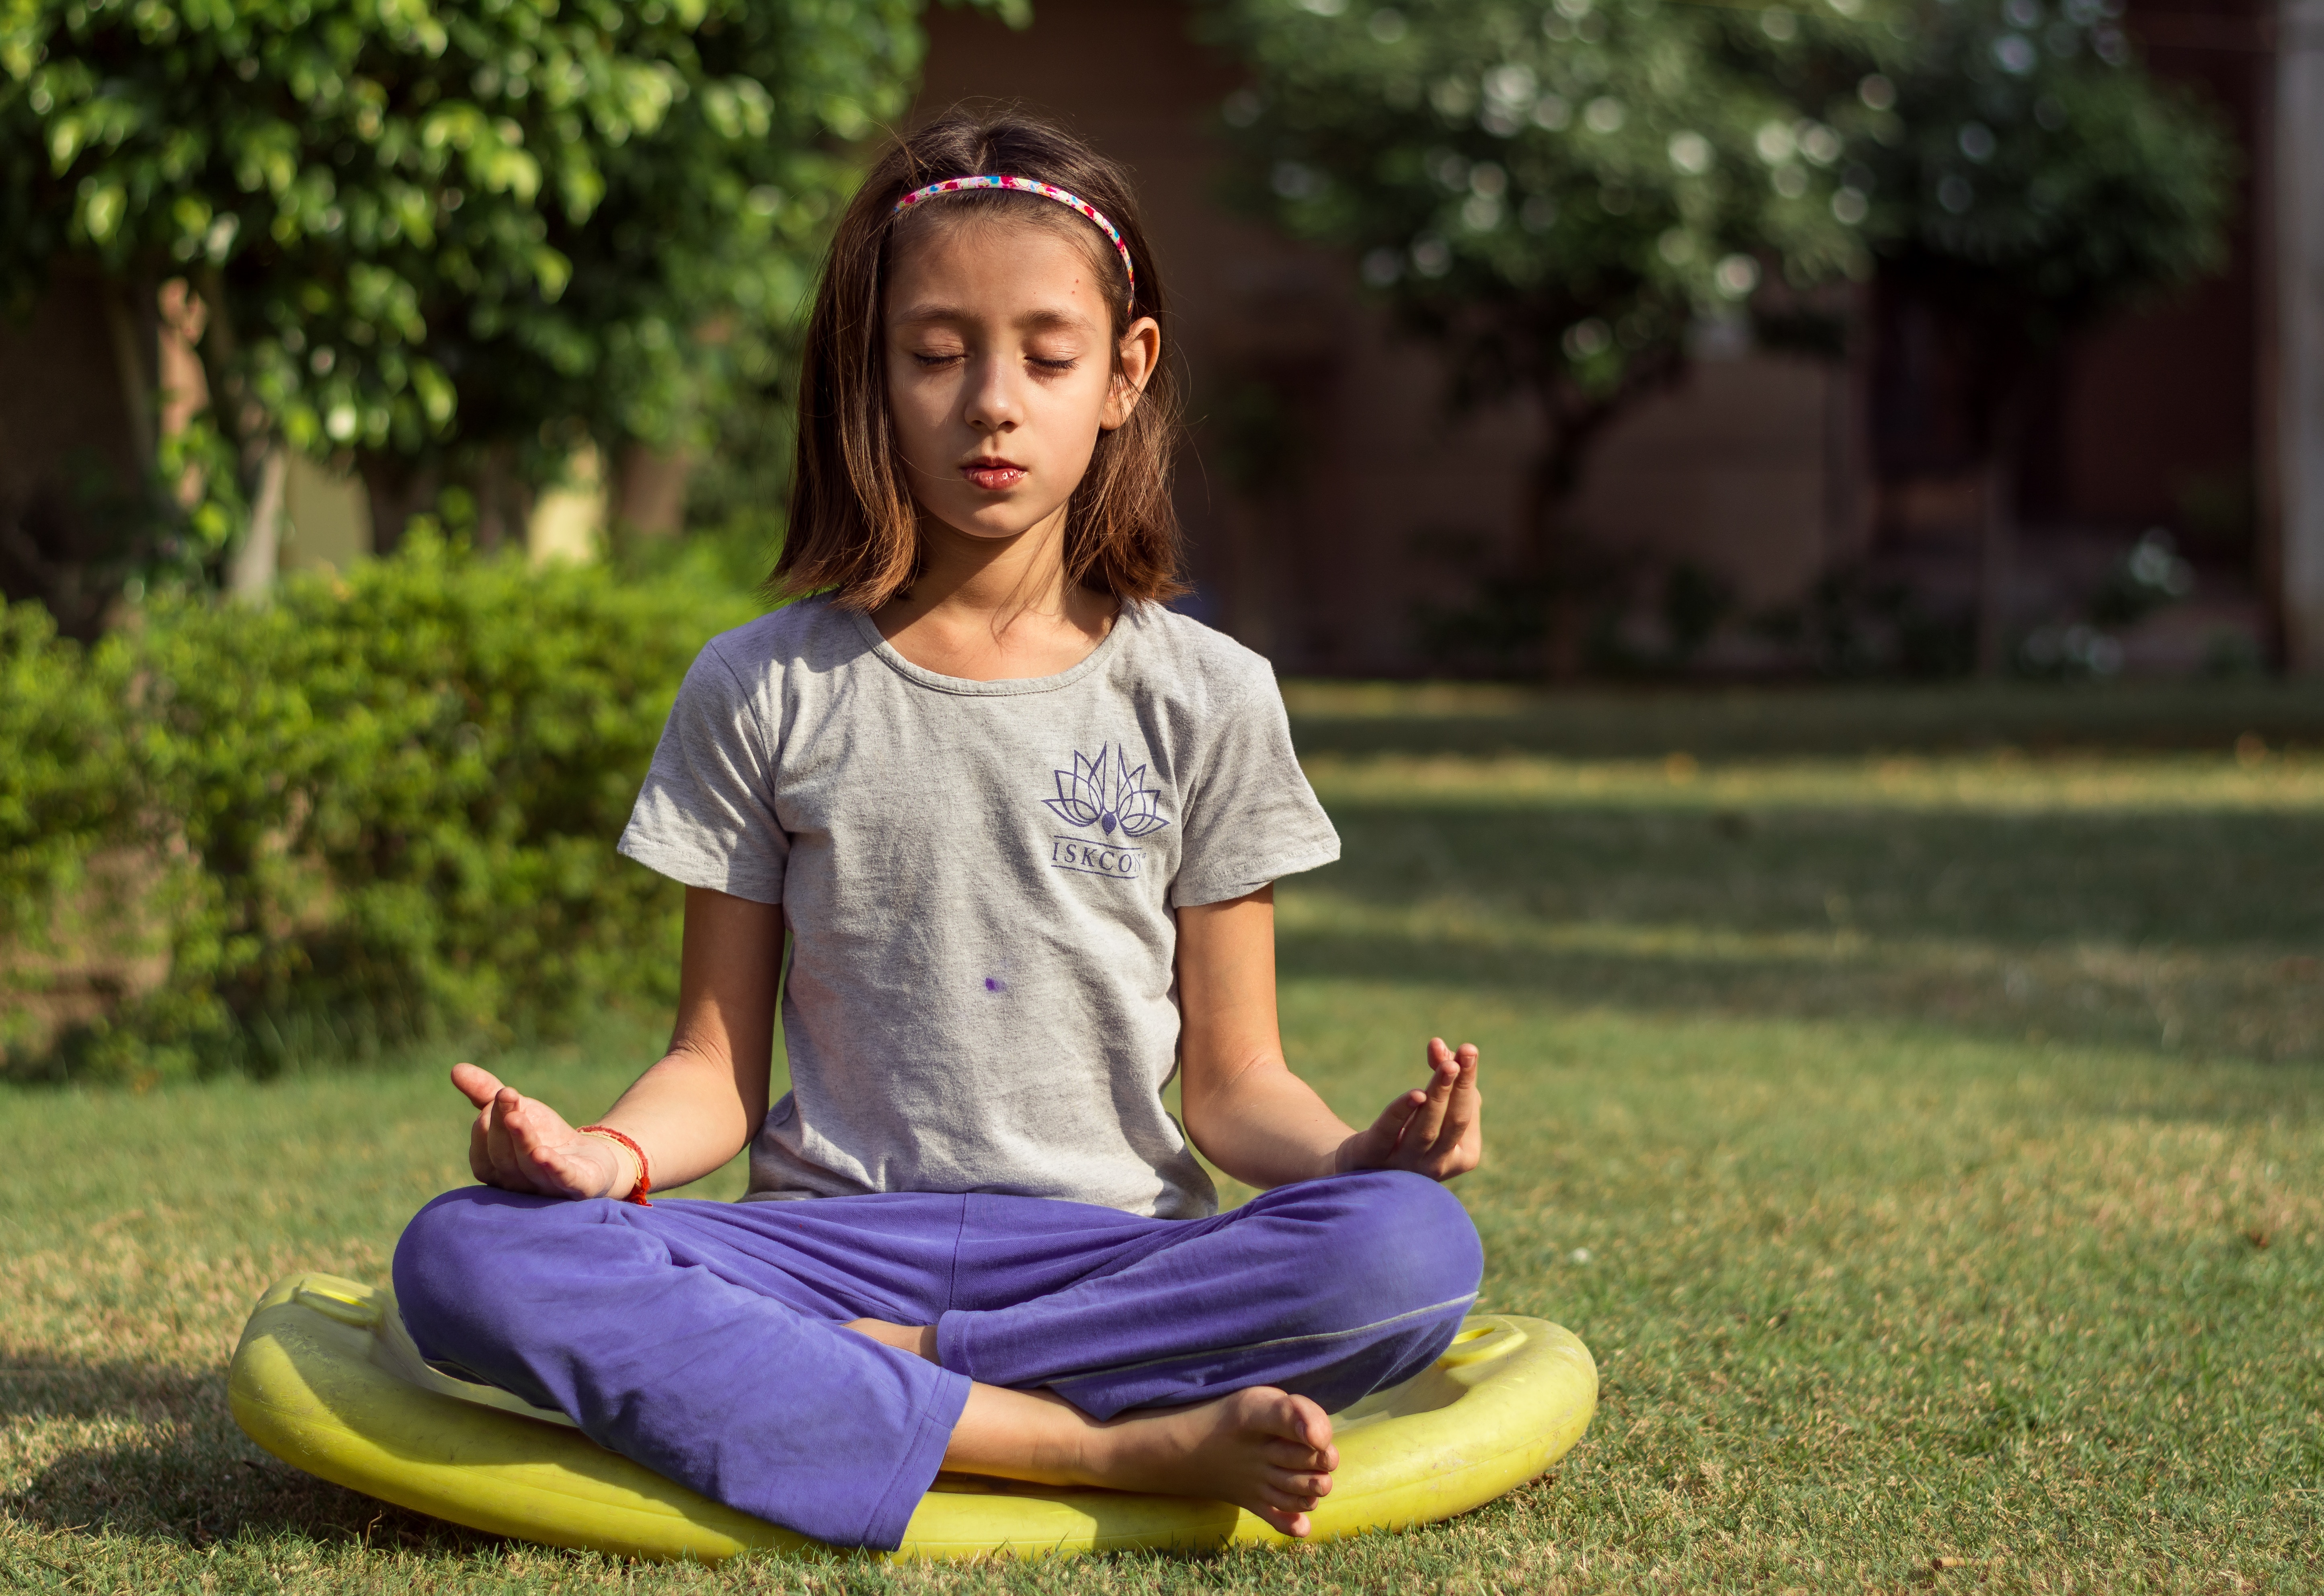 Can Children Practise Mindfulness? 3 Activities to Try